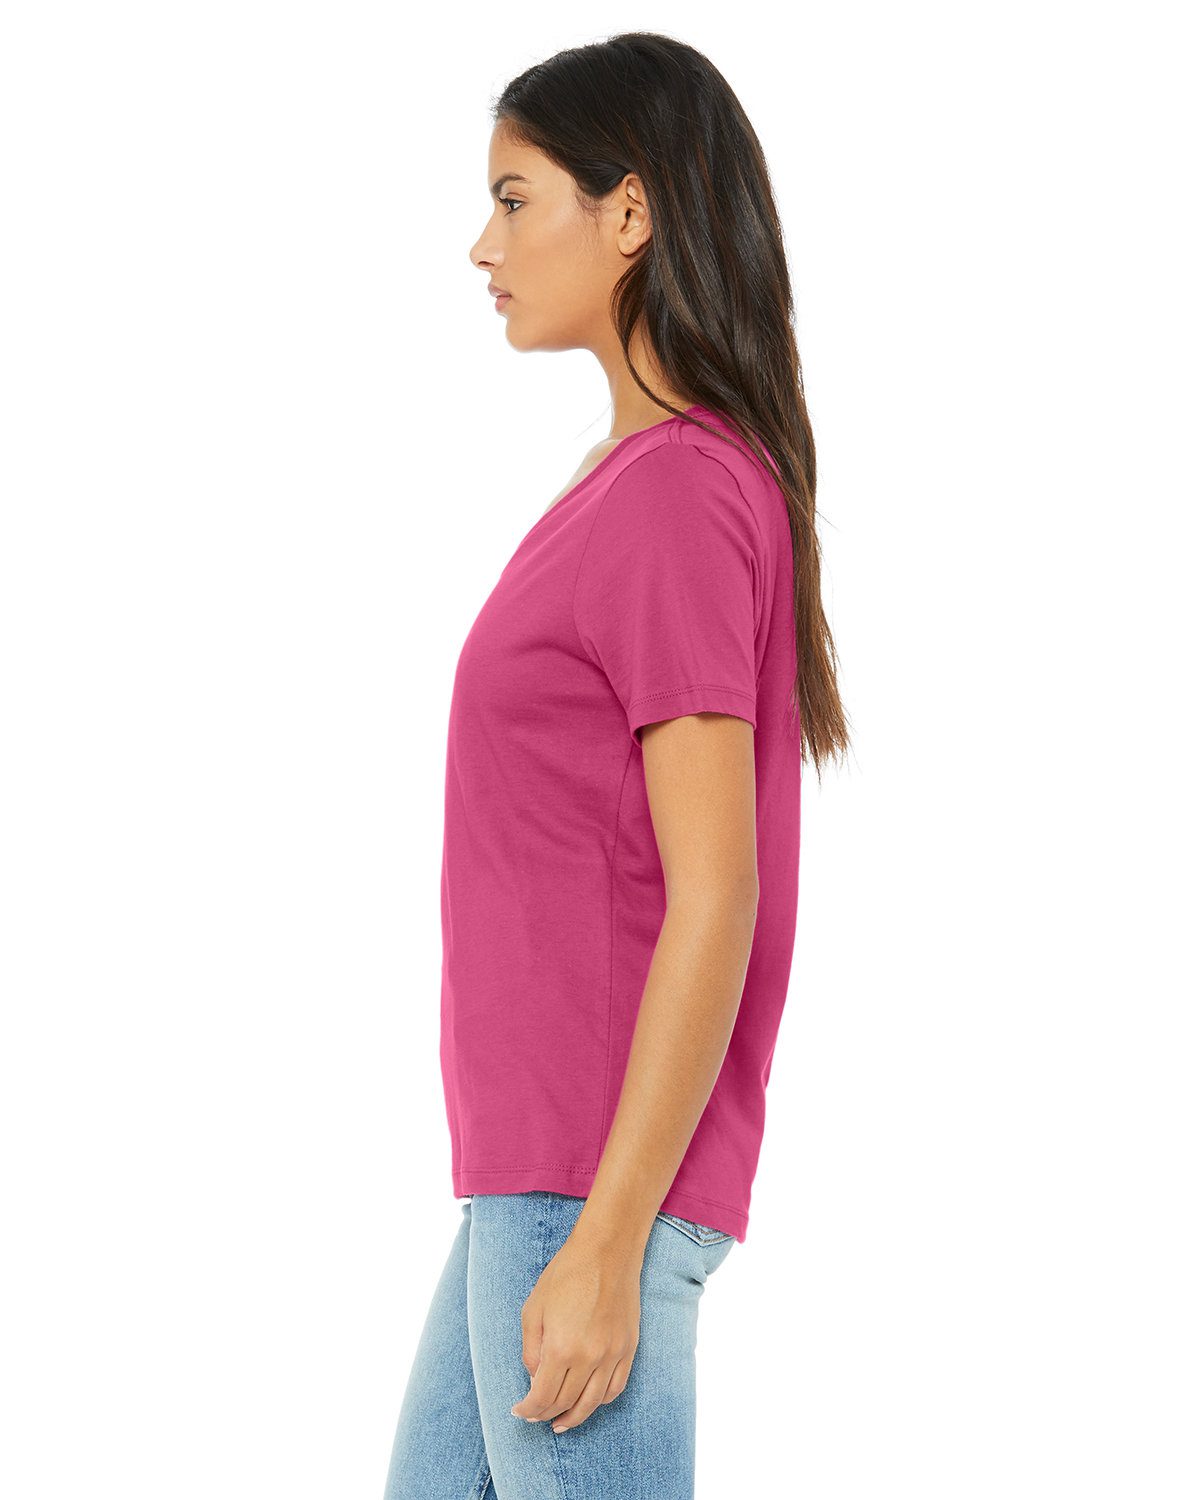 Bella + Canvas Ladies' Relaxed Jersey V-Neck T-Shirt #6405 Berry Side